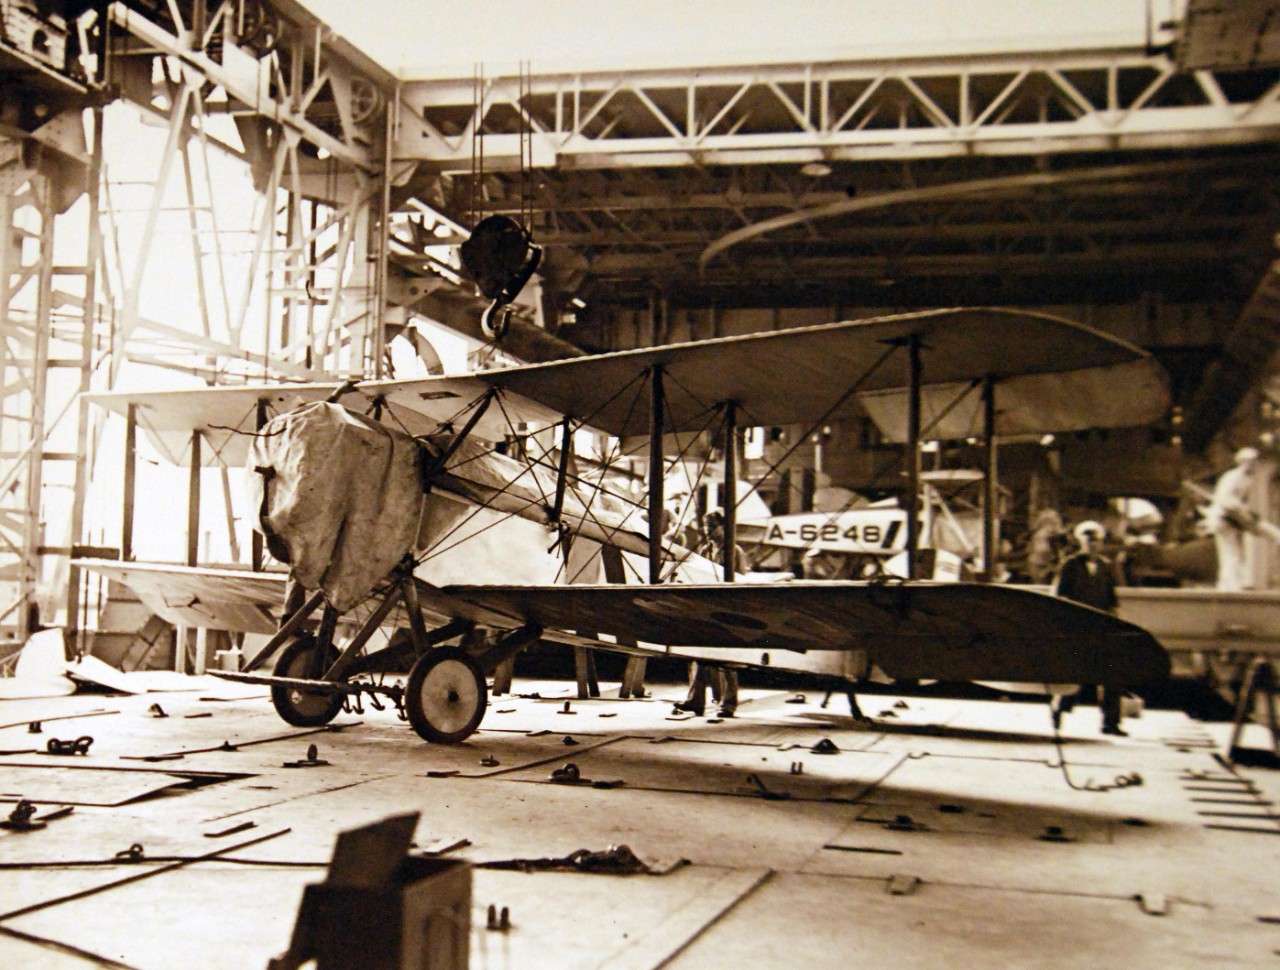 19-NS-L11:  USS Langley (CV 1), 1923.  Vought AS-1 or VE-7 Plane on deck, 19 July 1923.   Air plane slung on traveling crane.  Note size of hook on crane.    Official U.S. Navy photograph, now in the collections of the National Archives.   (2014/07/2) 